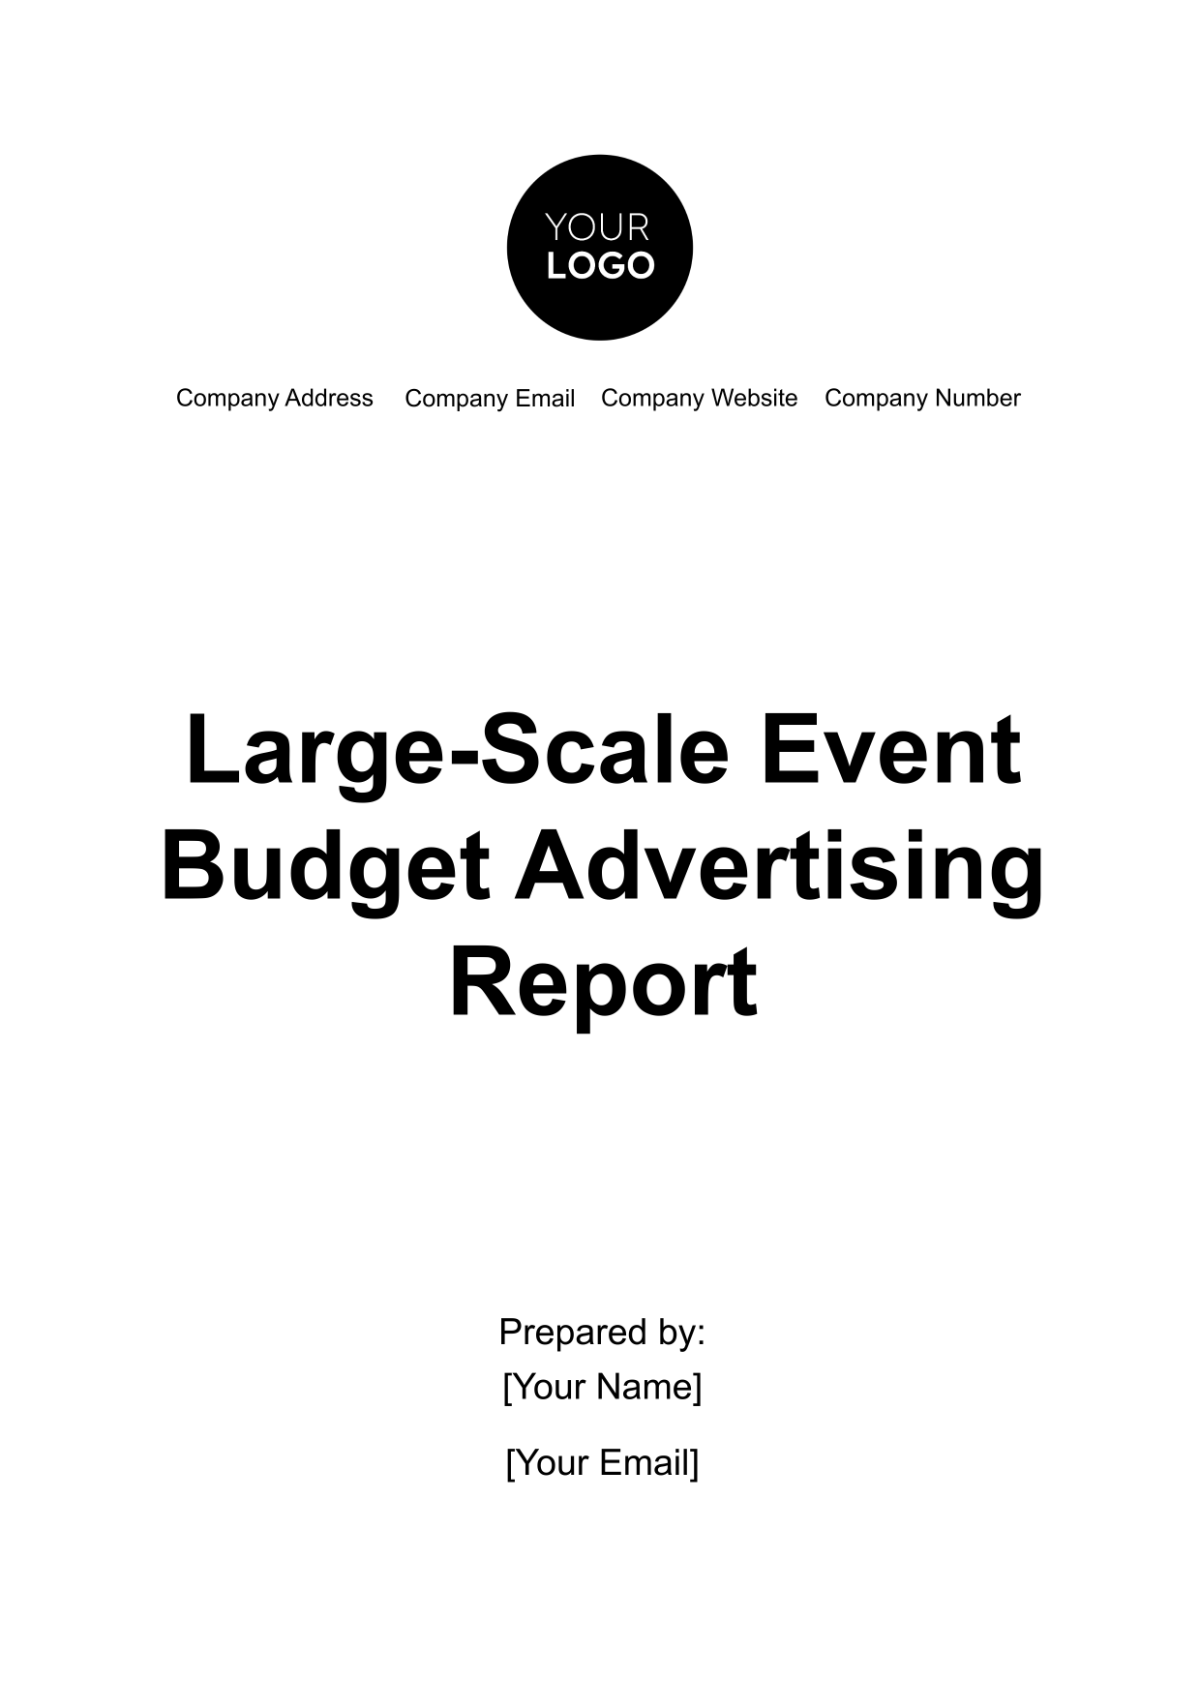 Large-Scale Event Budget Advertising Report Template